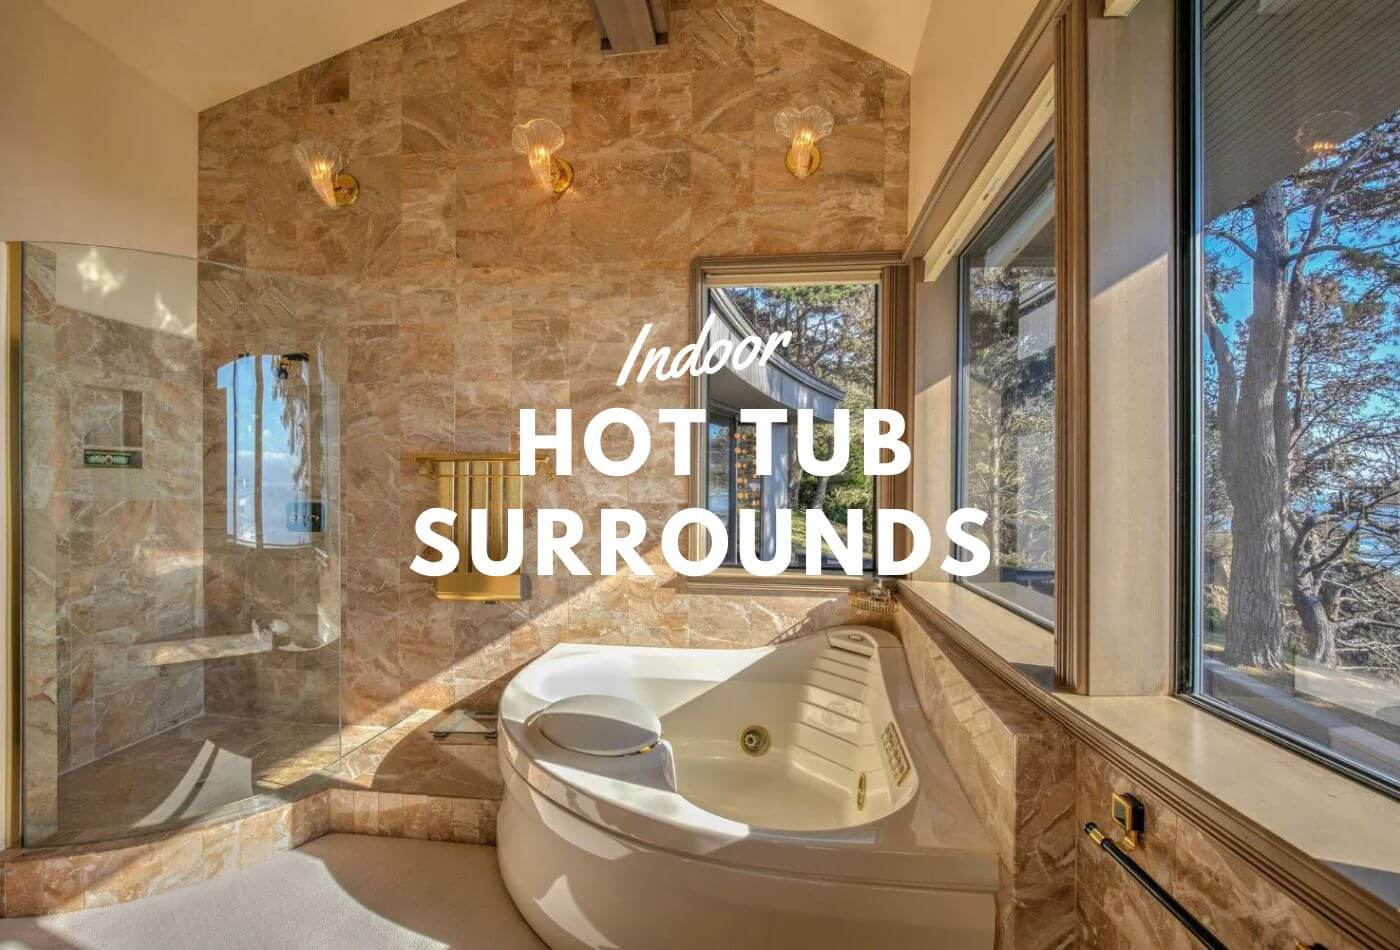 Enhance Indoor Hot Tub Surrounds With Stylish Experience